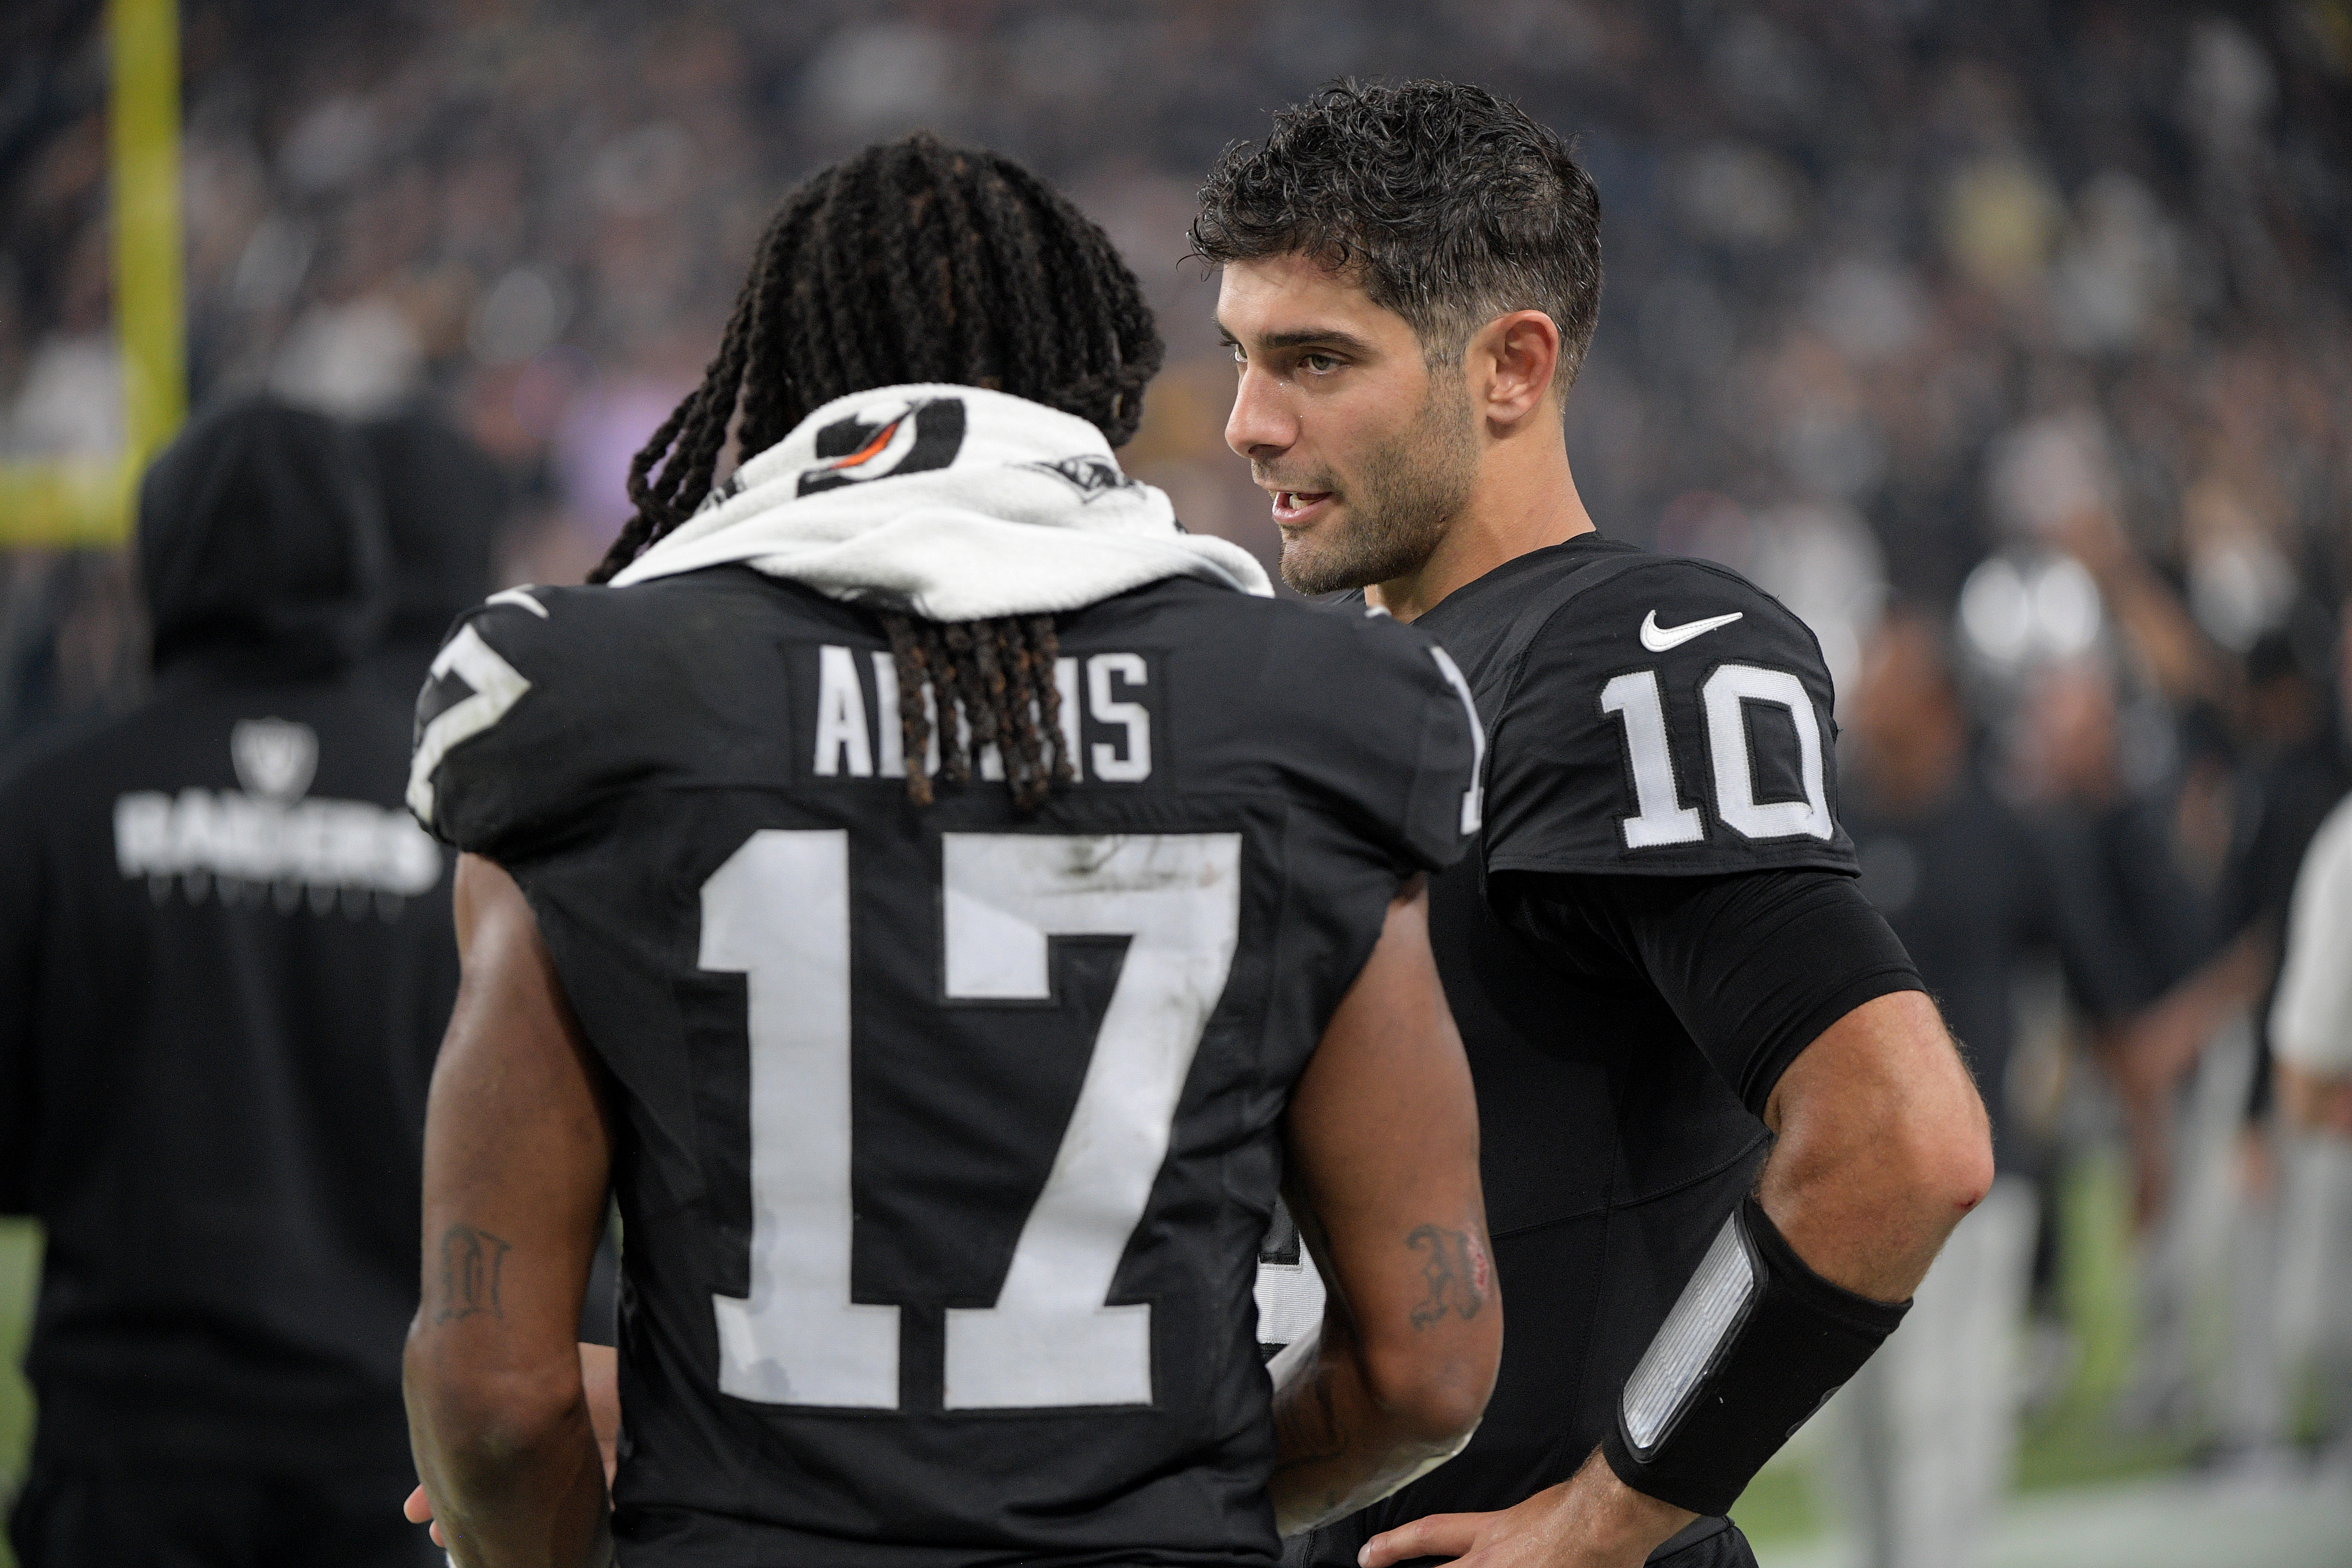 Raiders open as 4.5-point underdogs Week 4 at Los Angeles Chargers